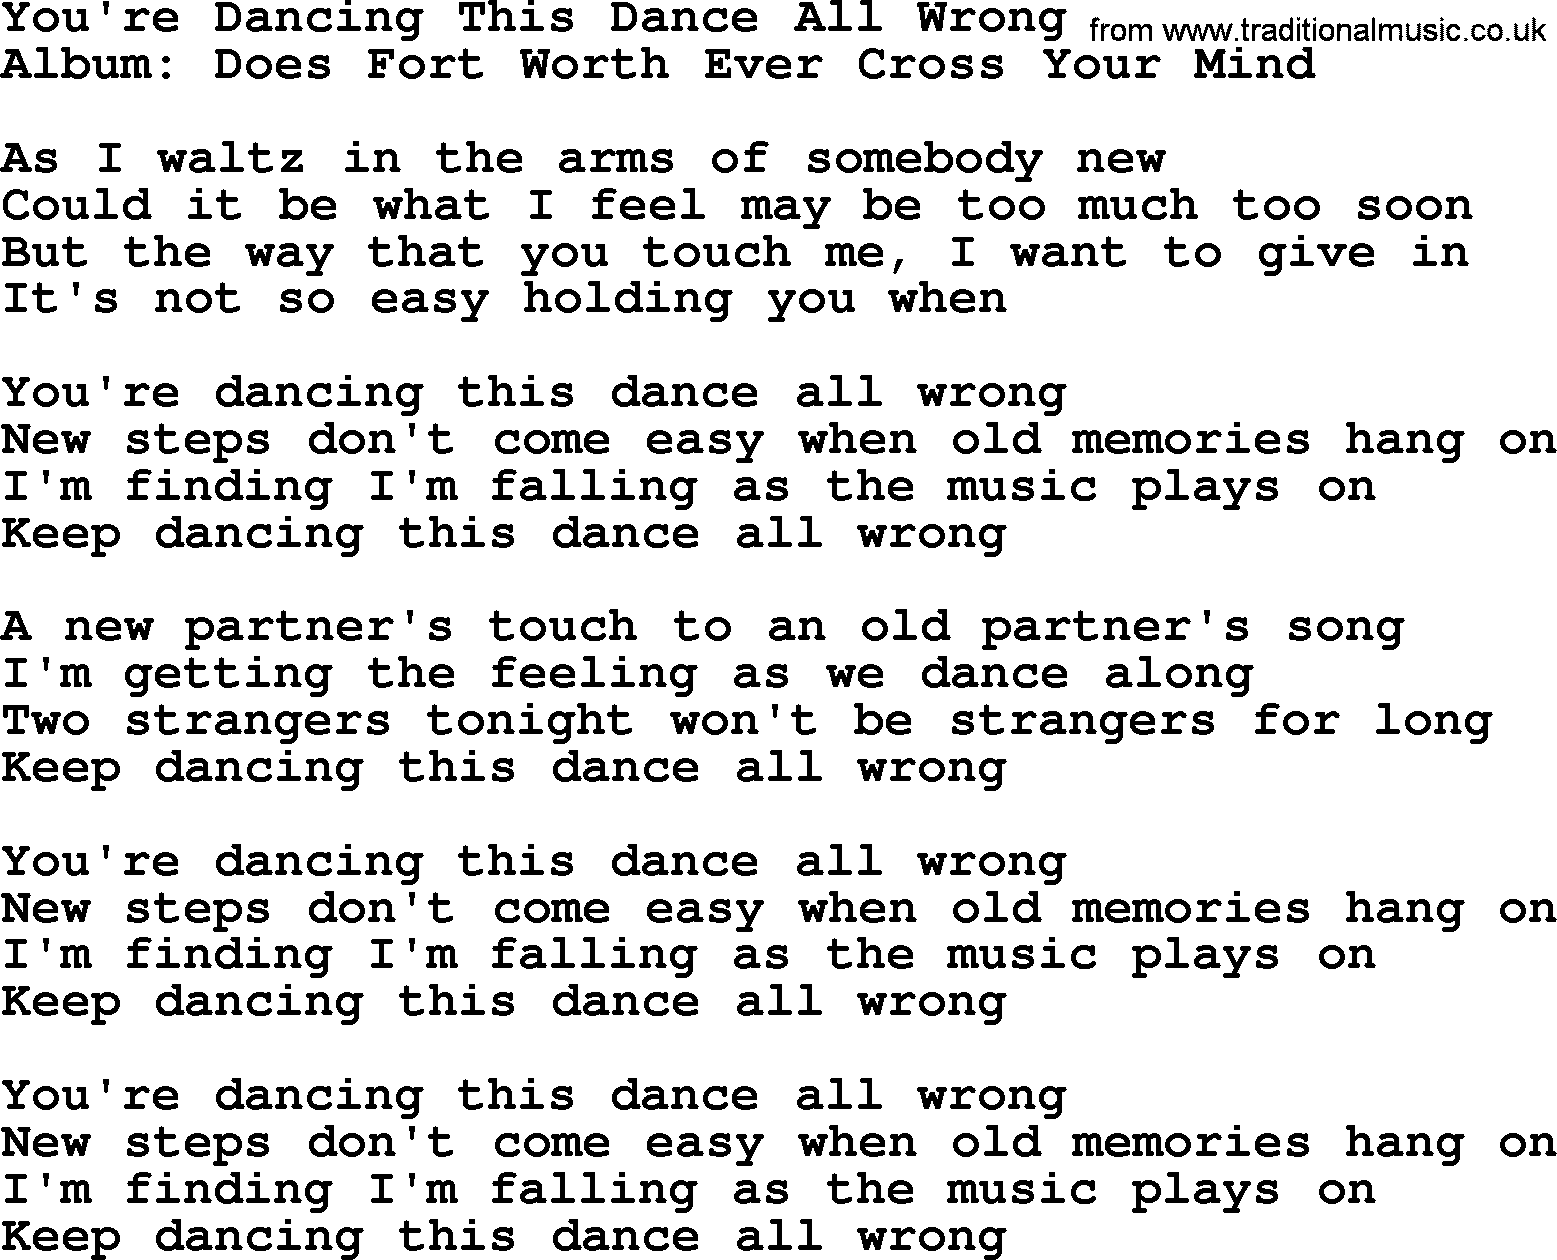 George Strait song: You're Dancing This Dance All Wrong, lyrics